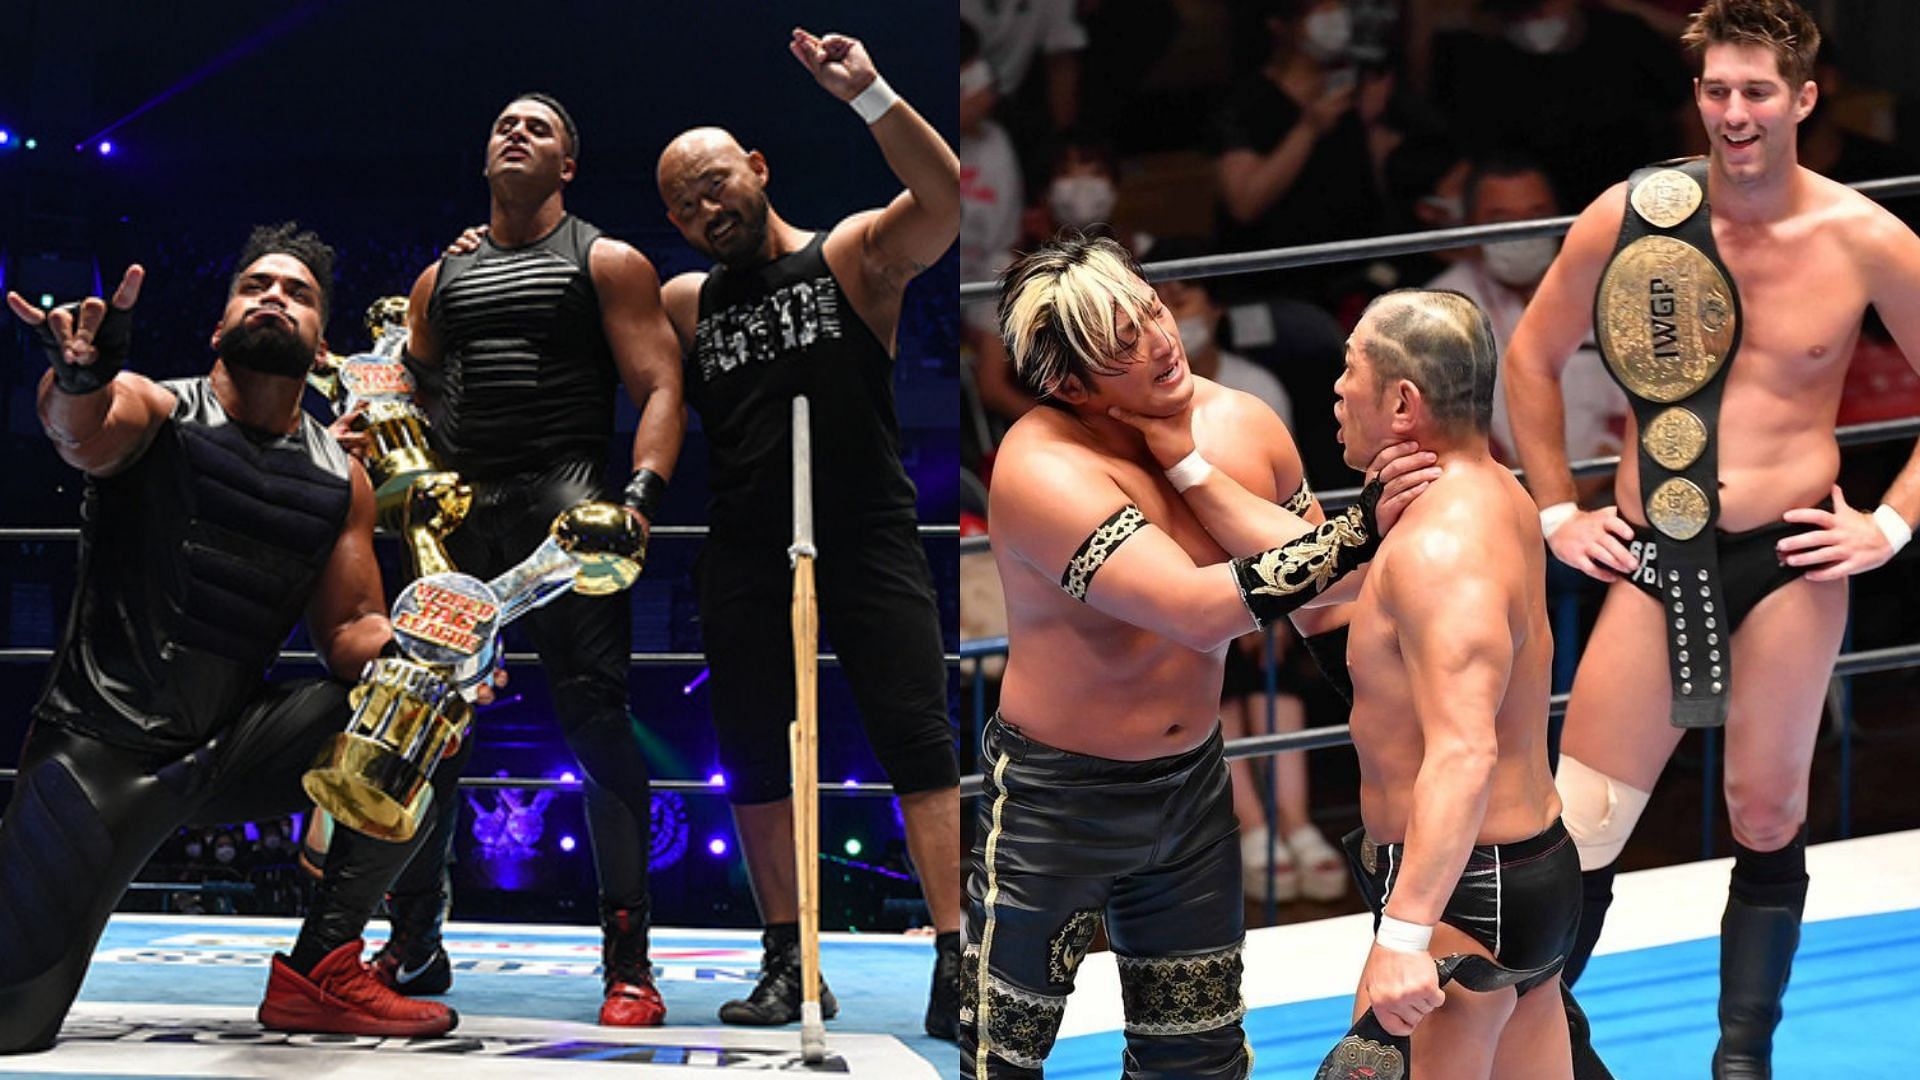 The World Tag League 2021 will include teams from Bullet Club and Suzuki-gun.